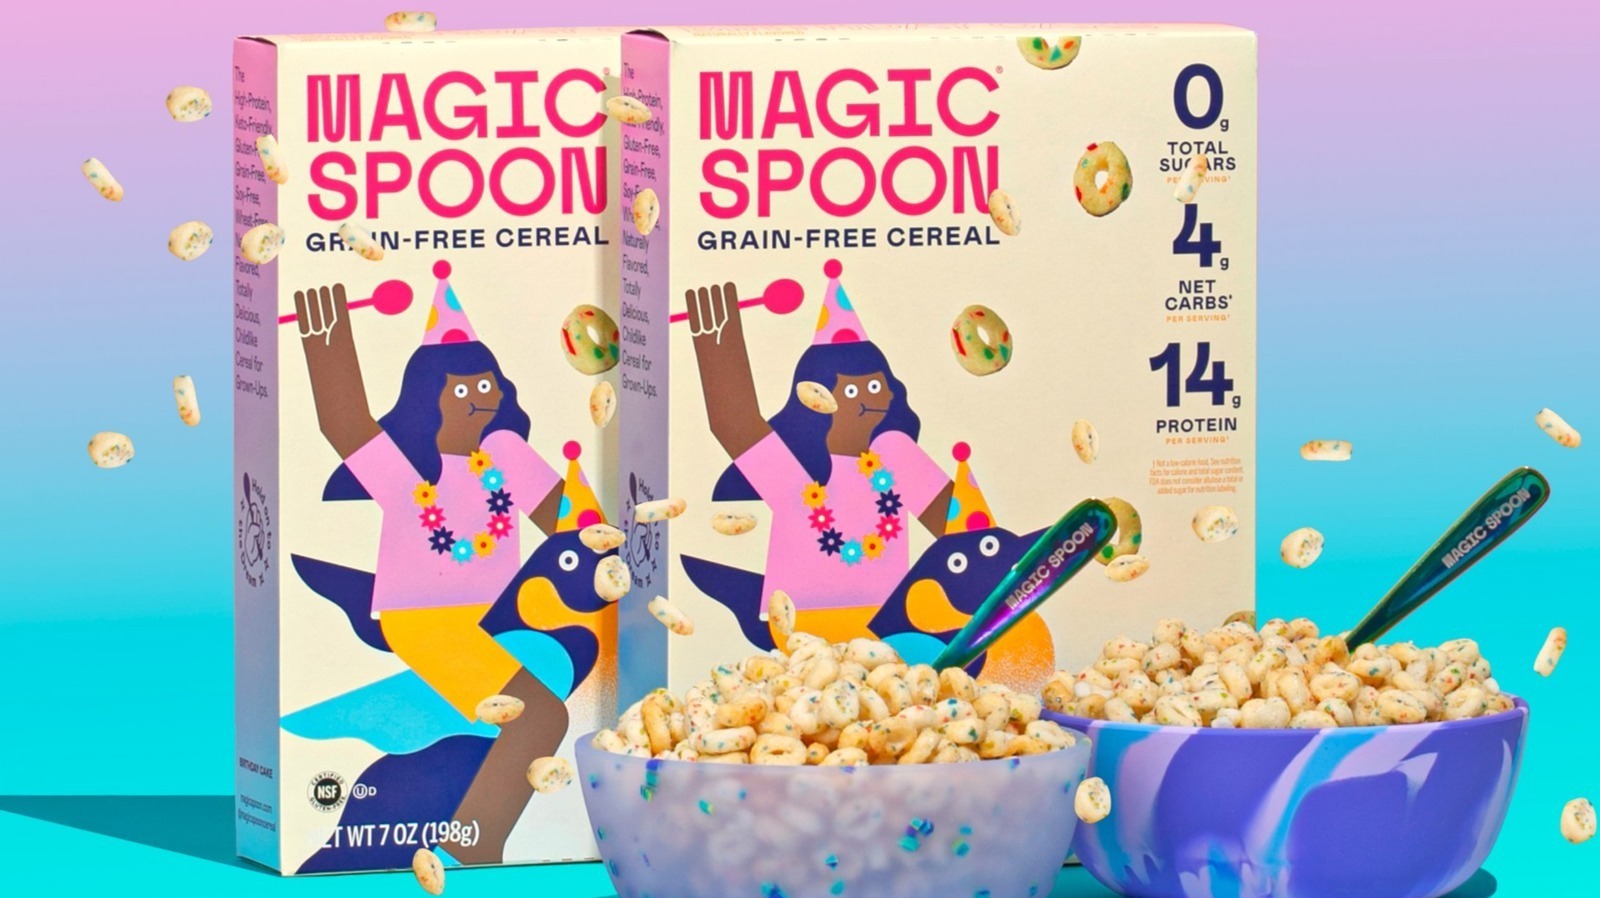 the-unexpected-food-magic-spoon-s-creators-made-before-cereal